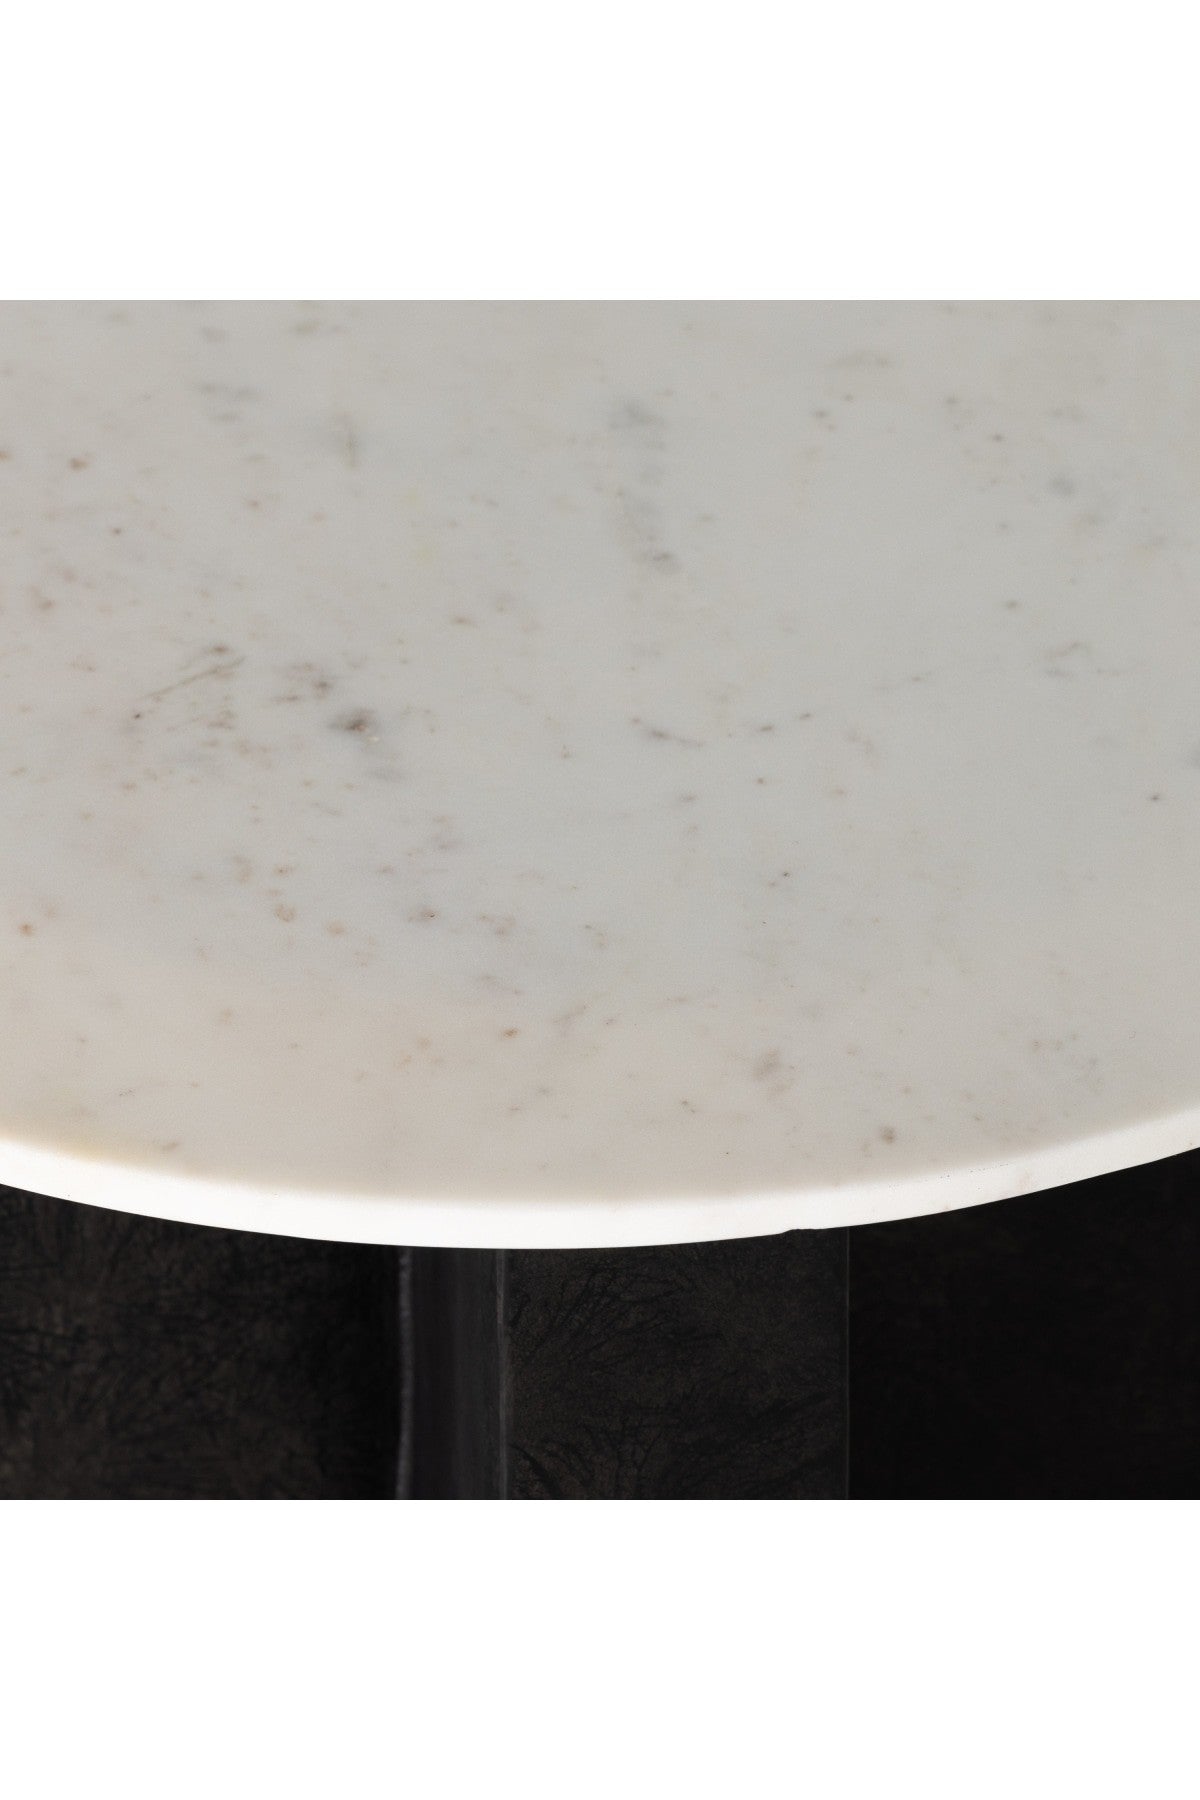 Crosley Round End Table - White Marble